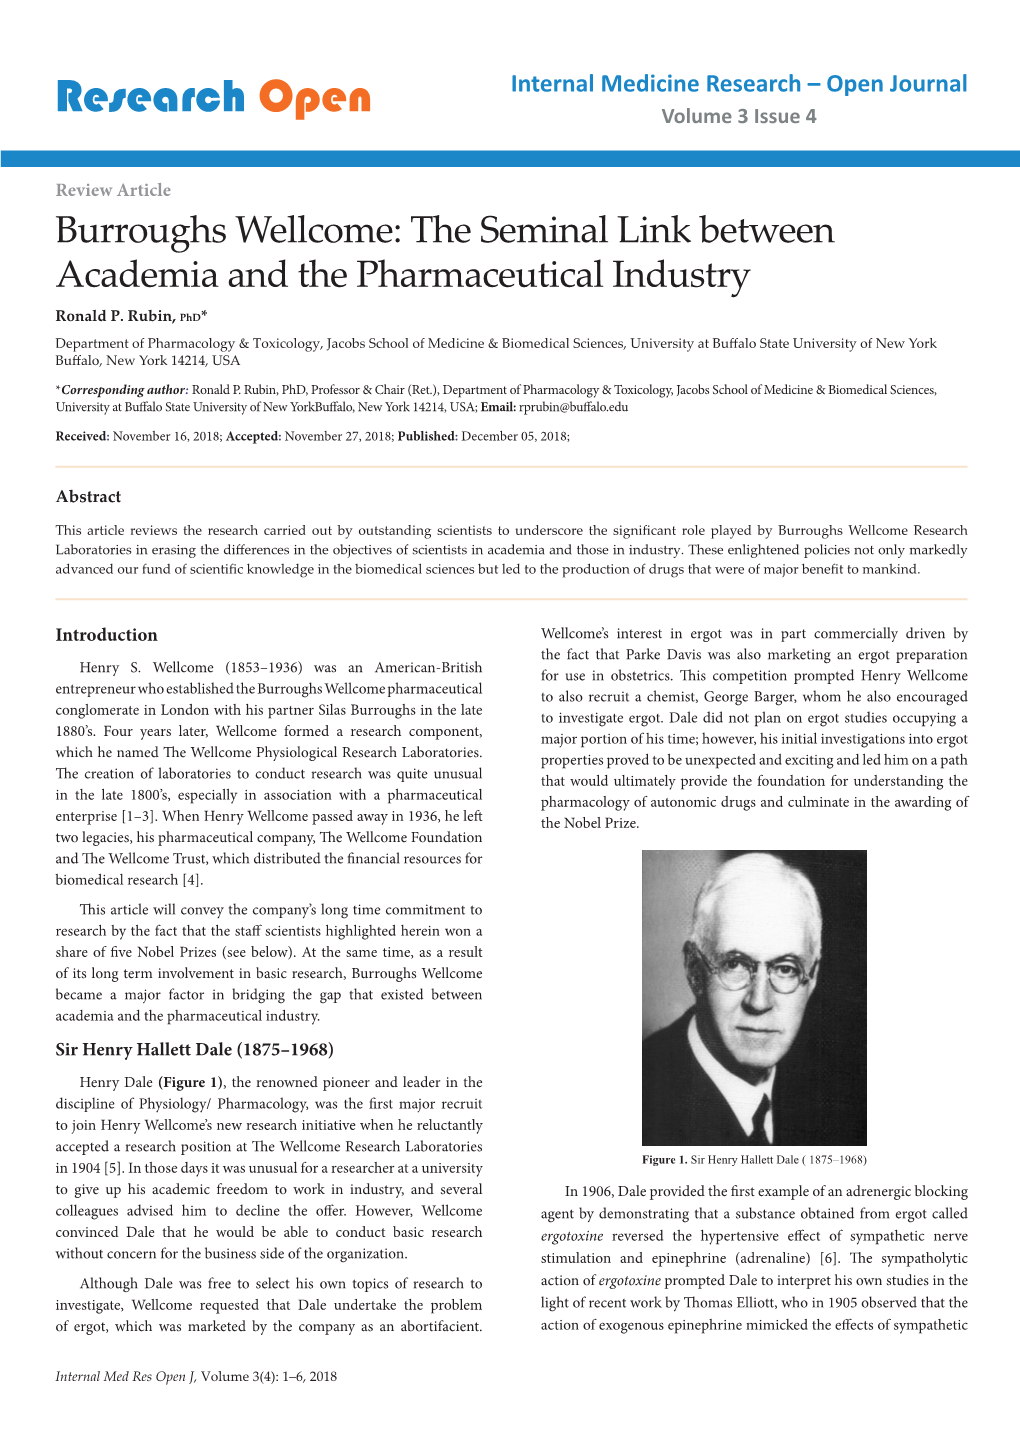 View Article Burroughs Wellcome: the Seminal Link Between Academia and the Pharmaceutical Industry